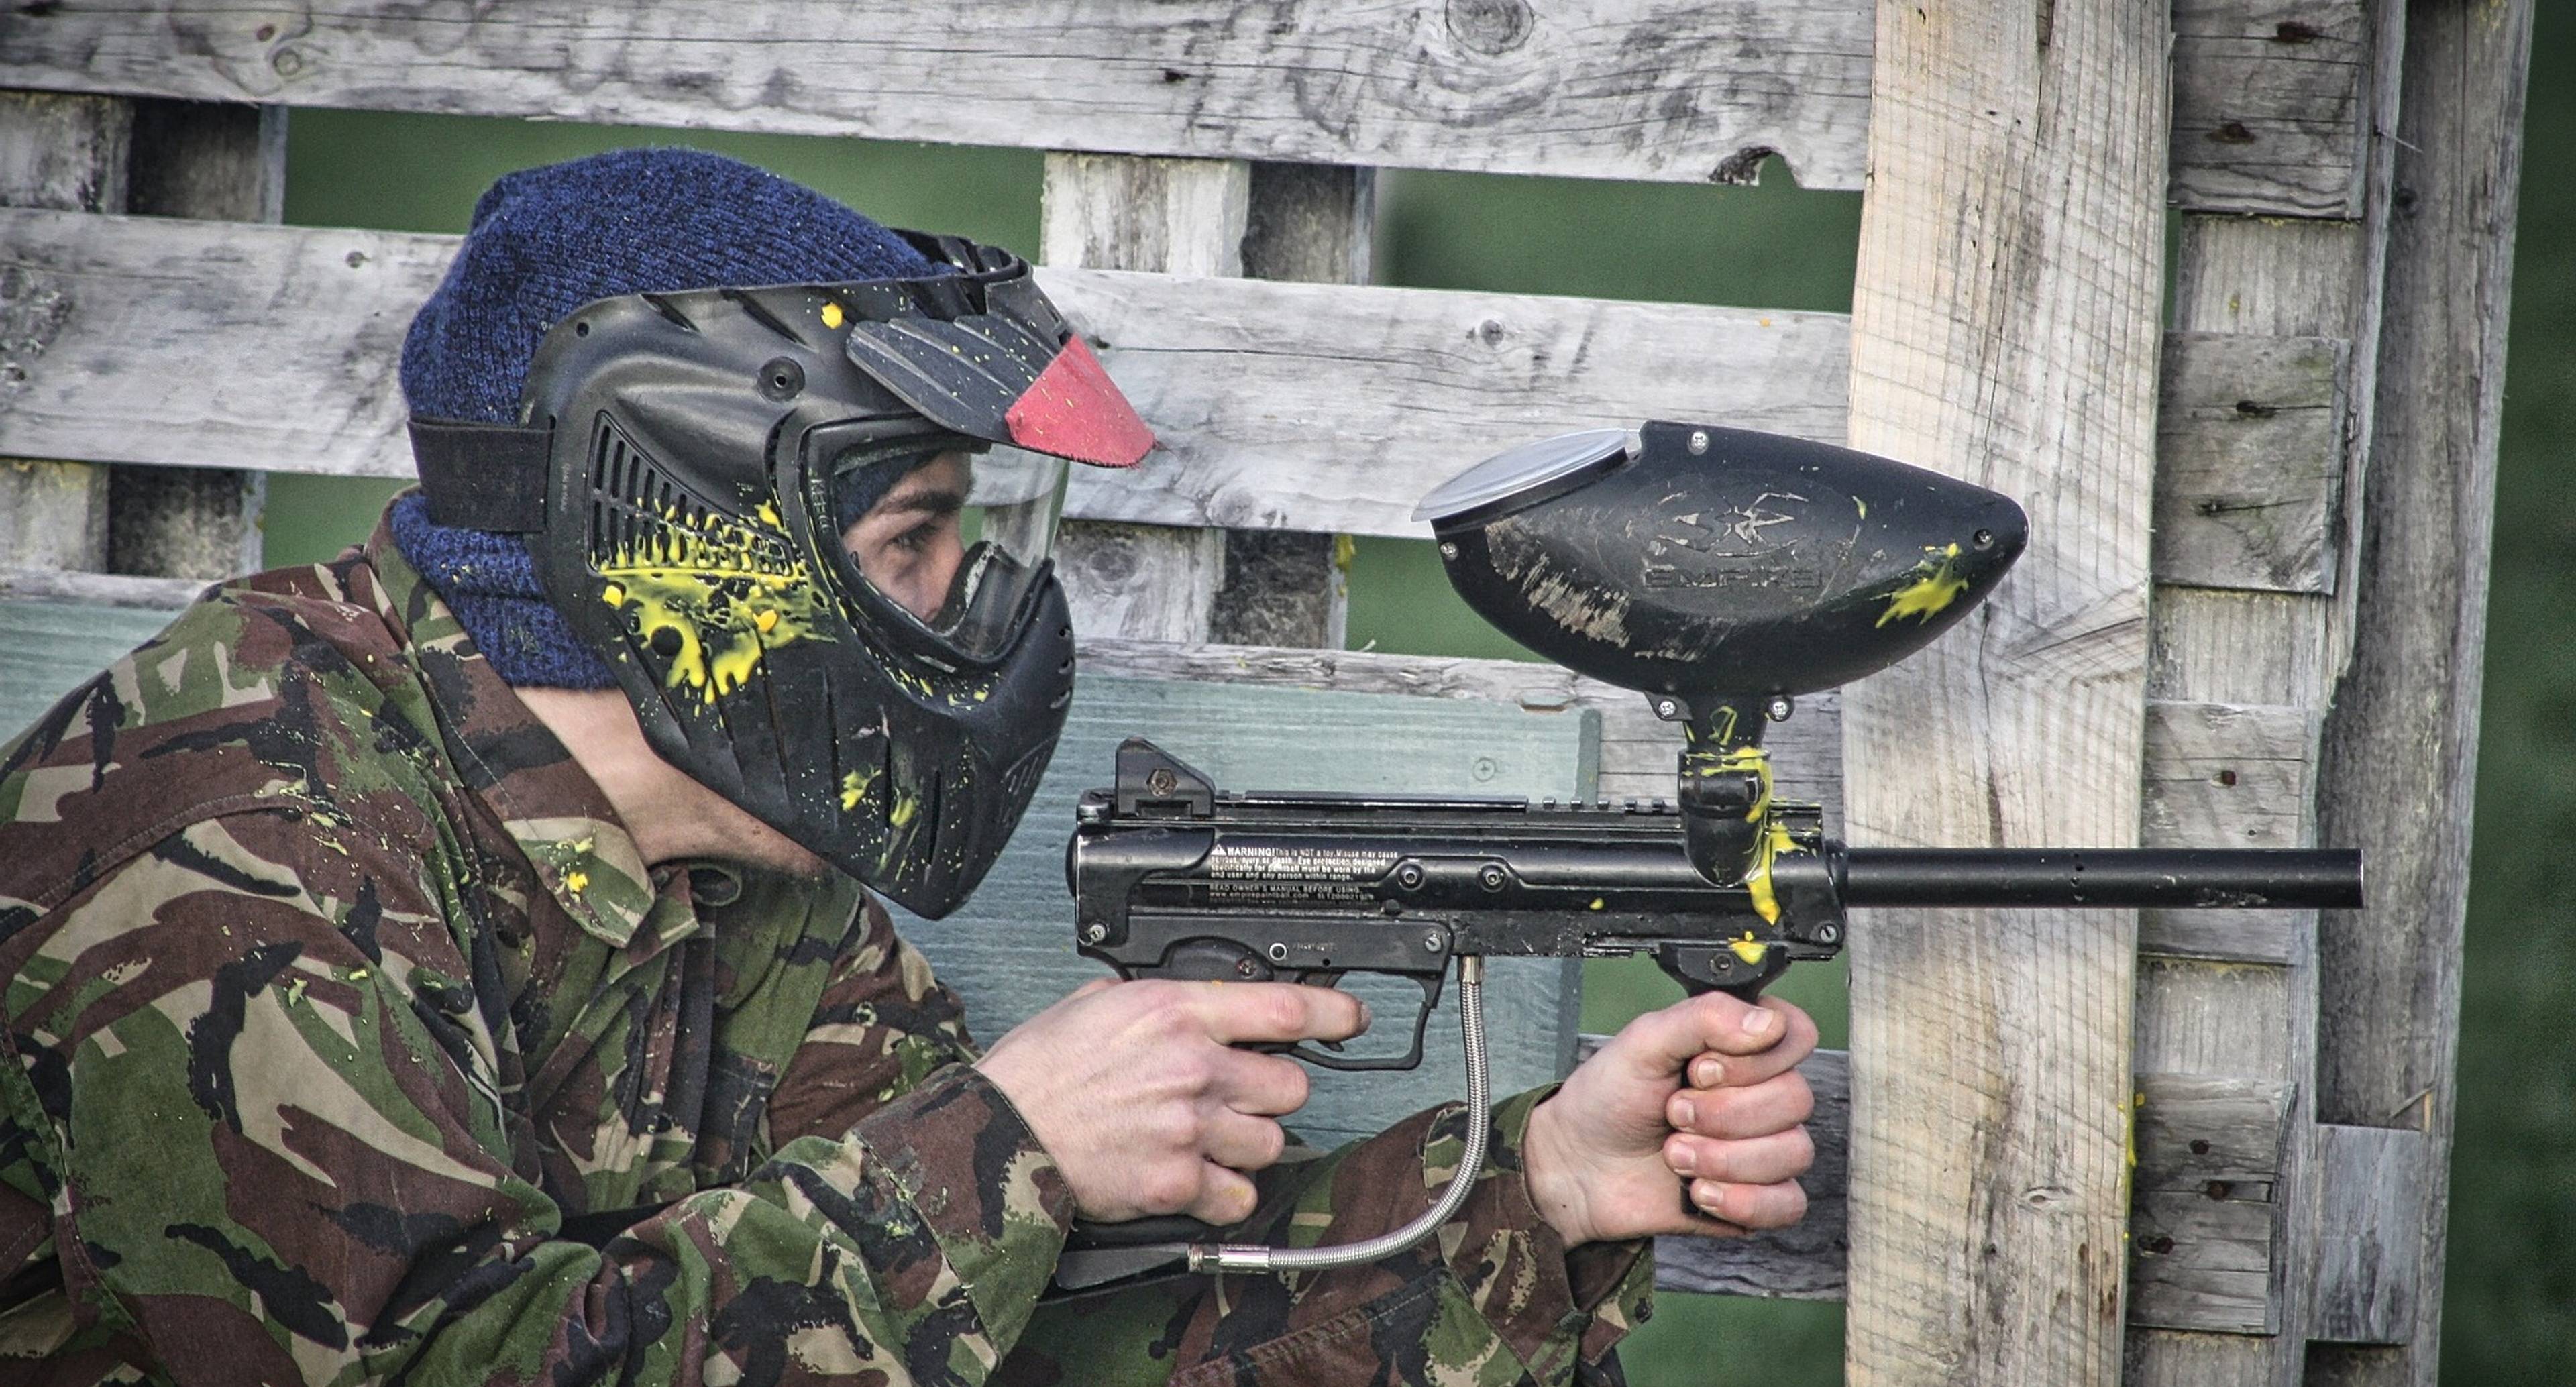 Let's play paintball.